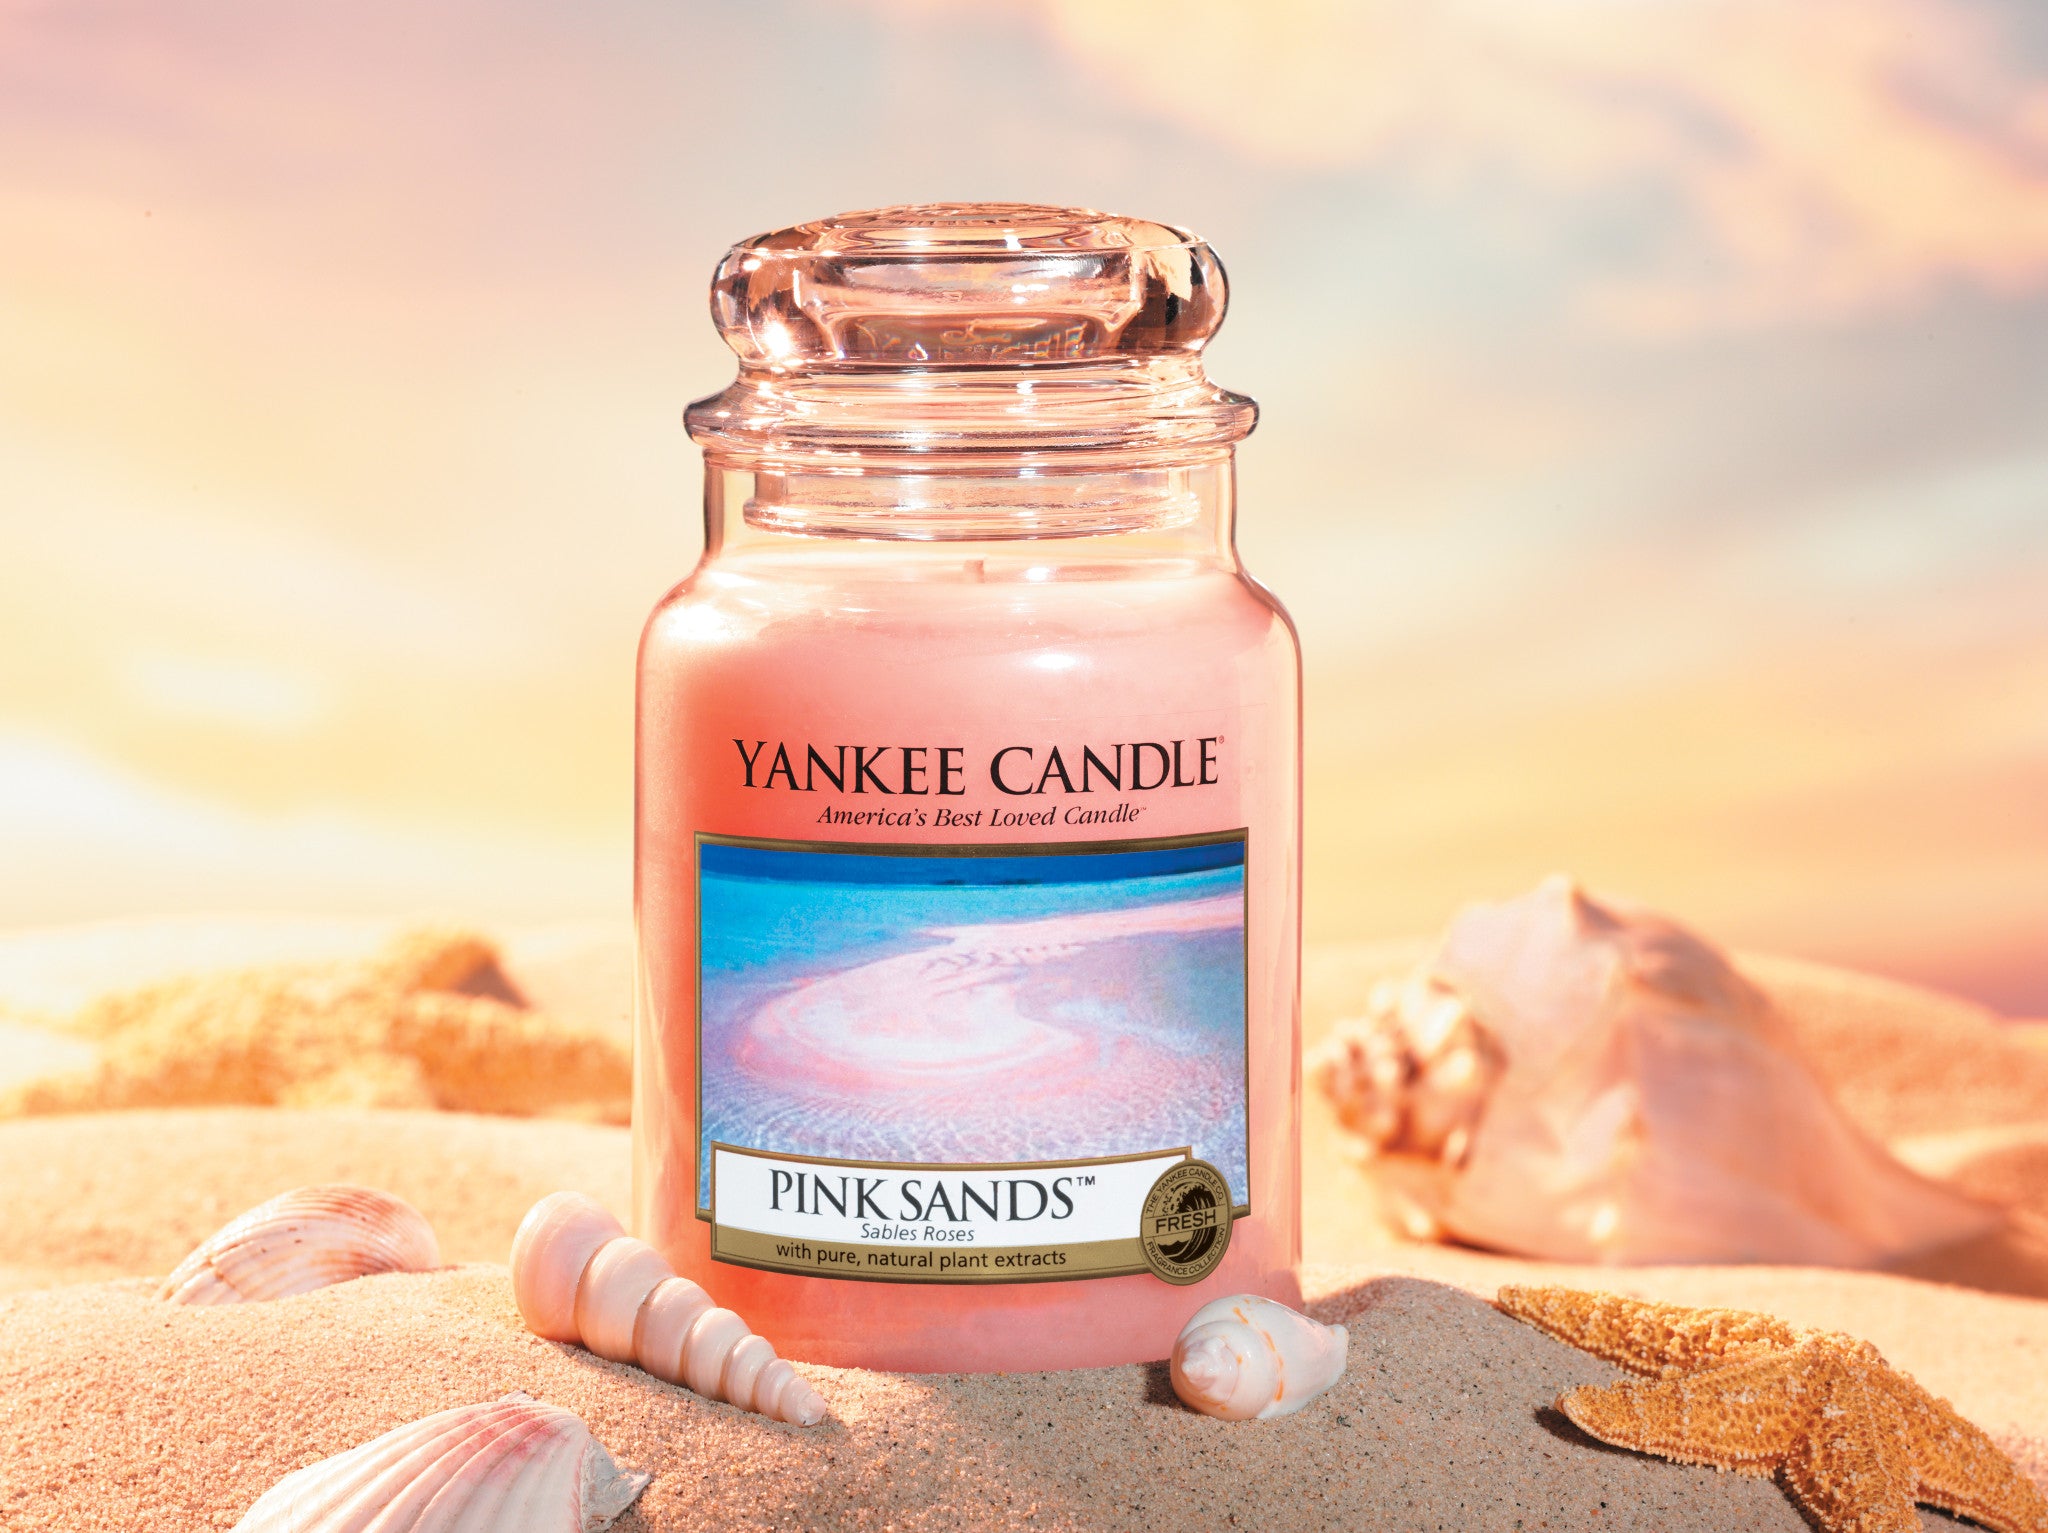 PINK SANDS -Yankee Candle- Giara Grande – Candle With Care